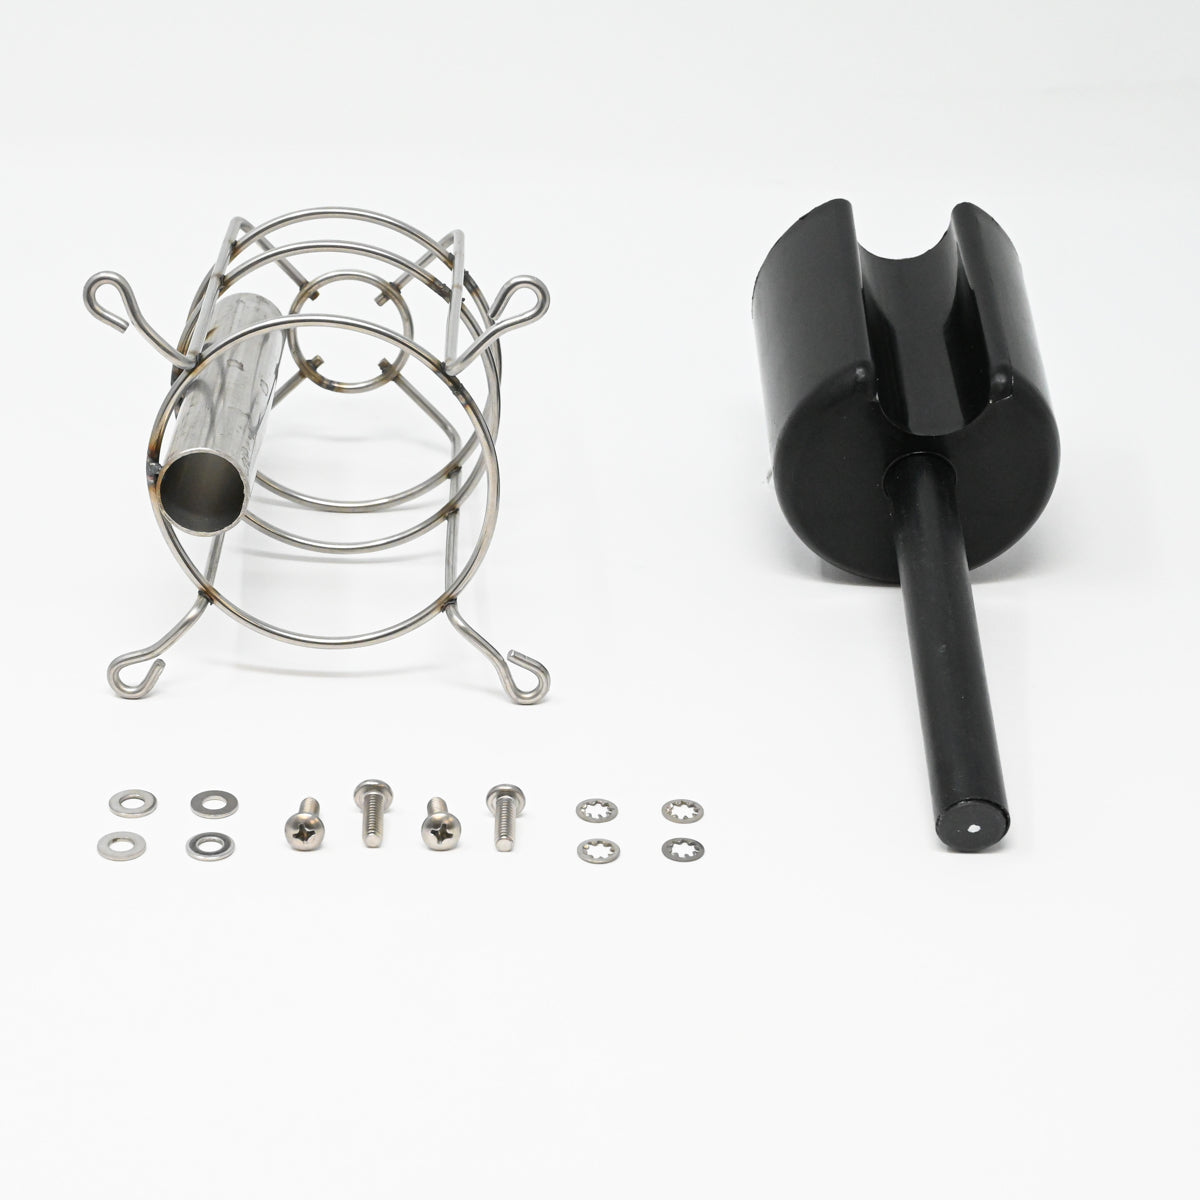 Float and housing assembly, screws and washers